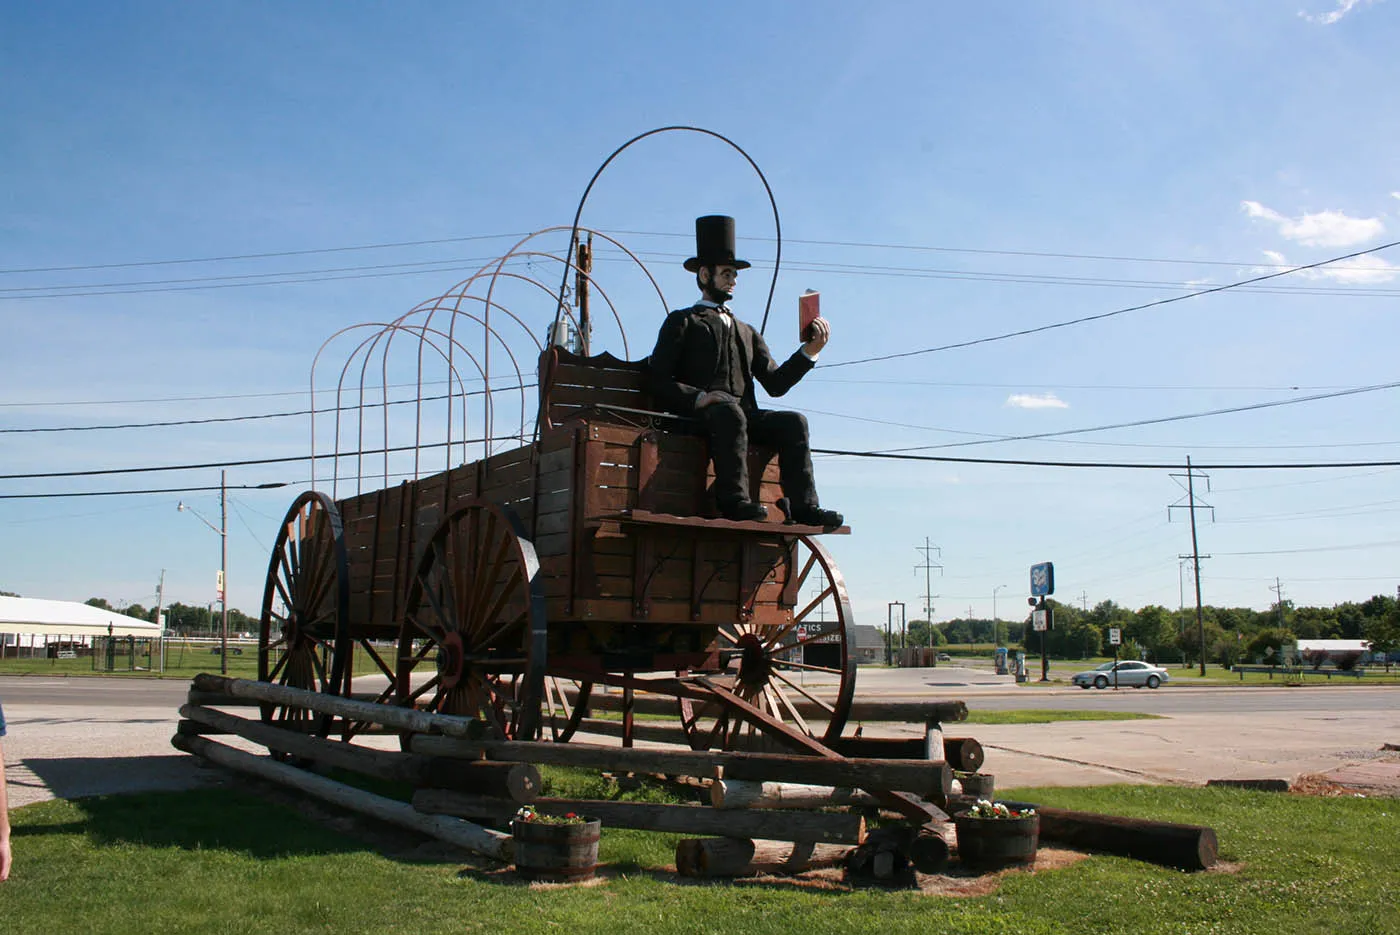 Best Illinois roadside attractions: Lincoln on the World's Largest Covered Wagon in Lincoln, Illinois. Visit this roadside attraction on an Illinois road trip with kids or weekend getaway with friends. Add the world's largest Covered Wagon to your road trip bucket list and visit them on your next travel adventure.